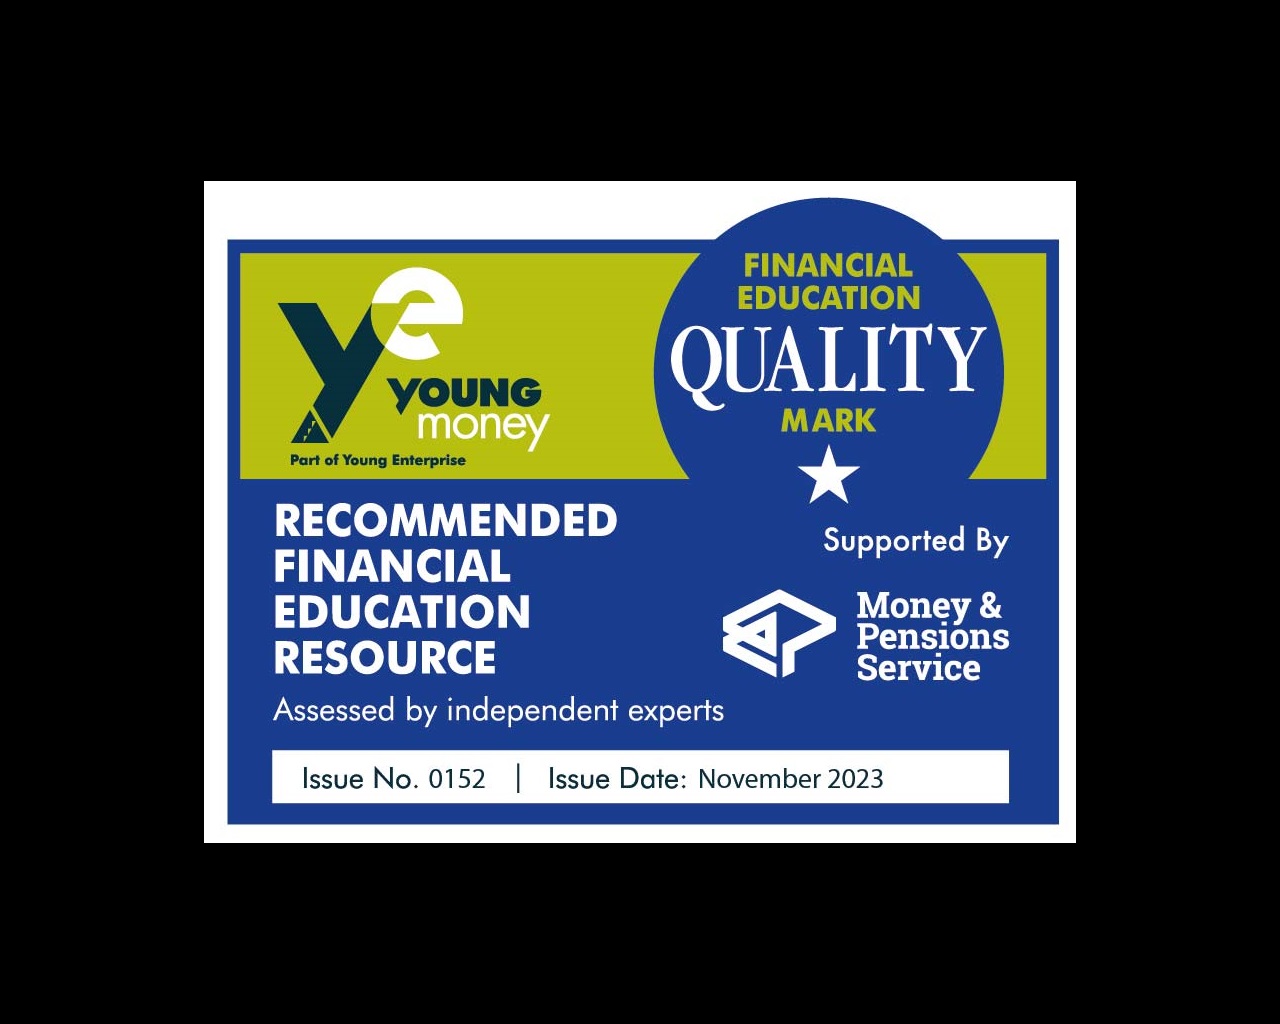 Young money has given us their financial education quality mark and econoME is a recommended financial education resource - Issue No.0145 | Issue Date: July 2020